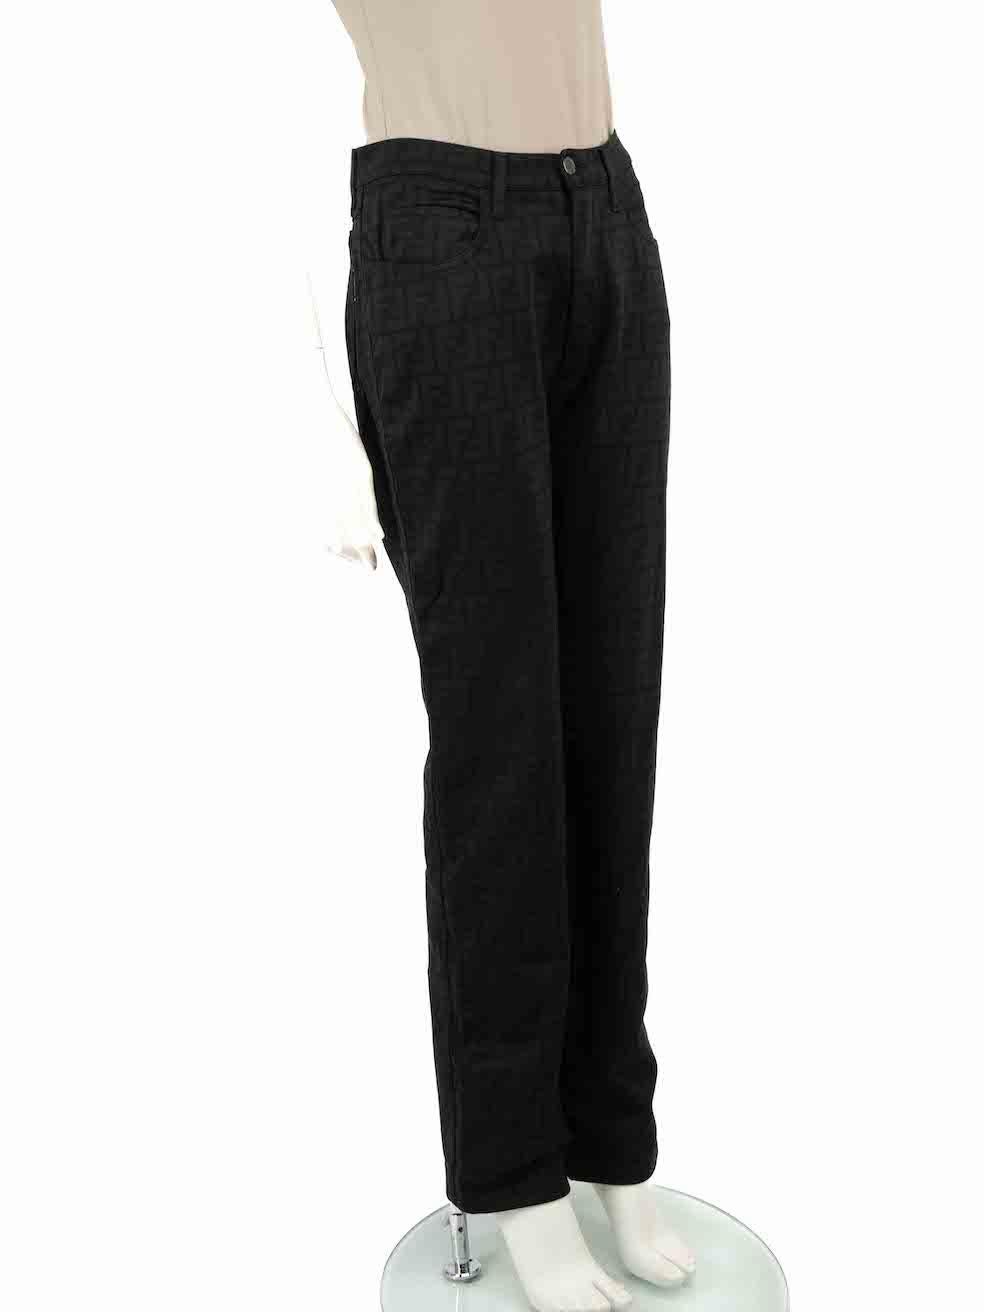 CONDITION is Very good. Hardly any visible wear to trousers is evident. However, the composition label is slightly frayed on this used Fendi designer resale item.
 
 
 
 Details
 
 
 Black
 
 Polyamide
 
 Slim fit trousers
 
 FF Zucca print pattern
